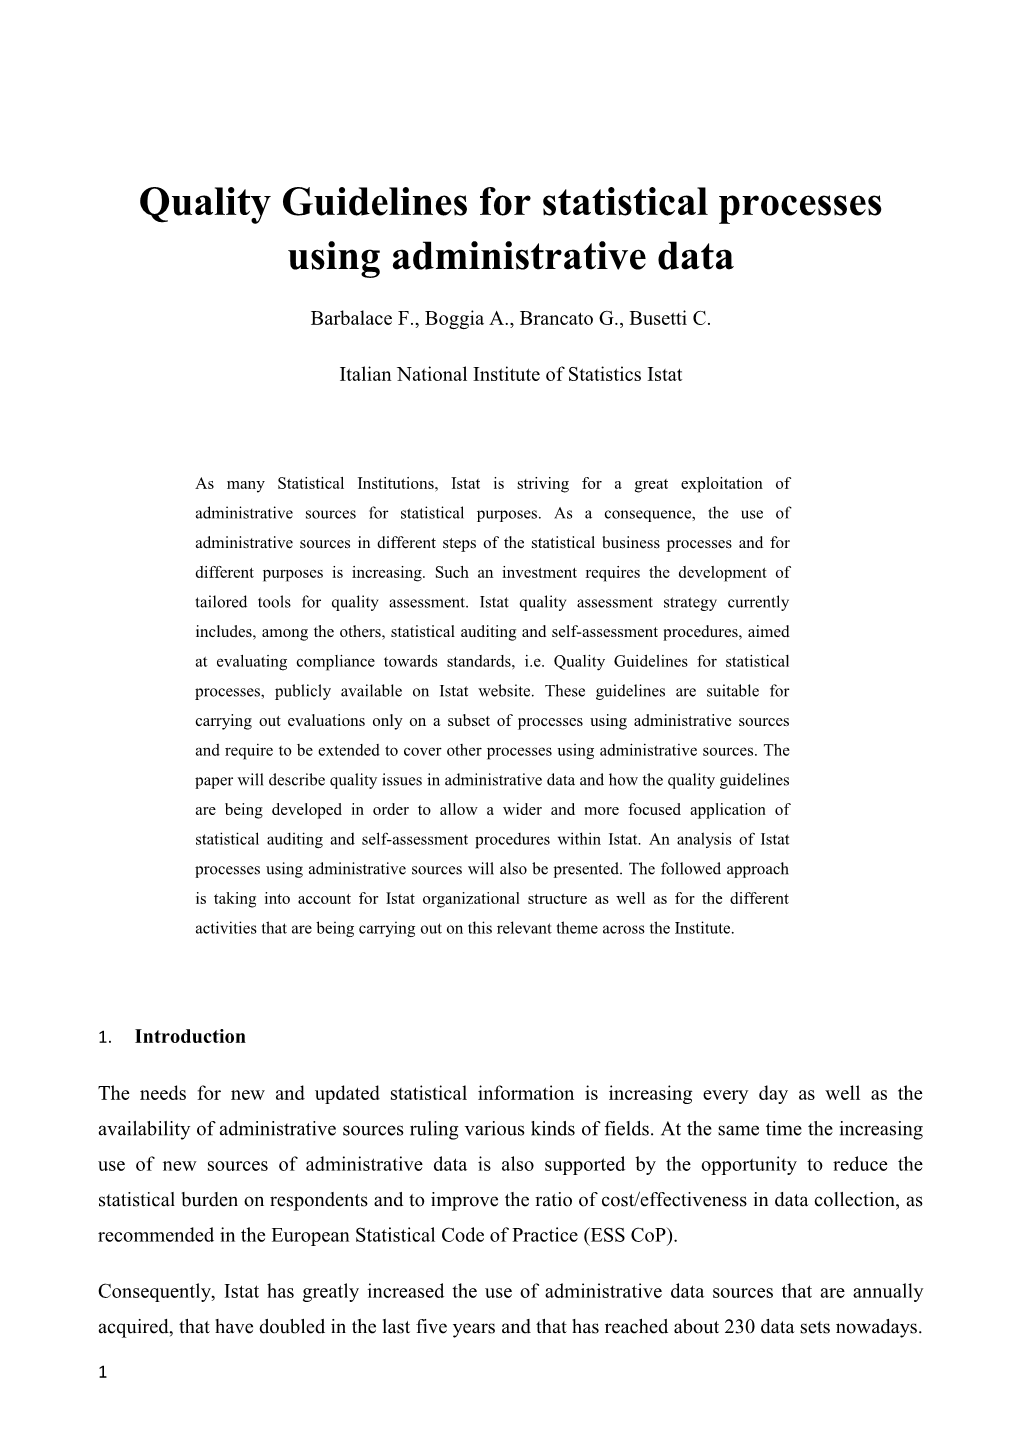 Quality Guidelines for Statistical Processes Using Administrative Data